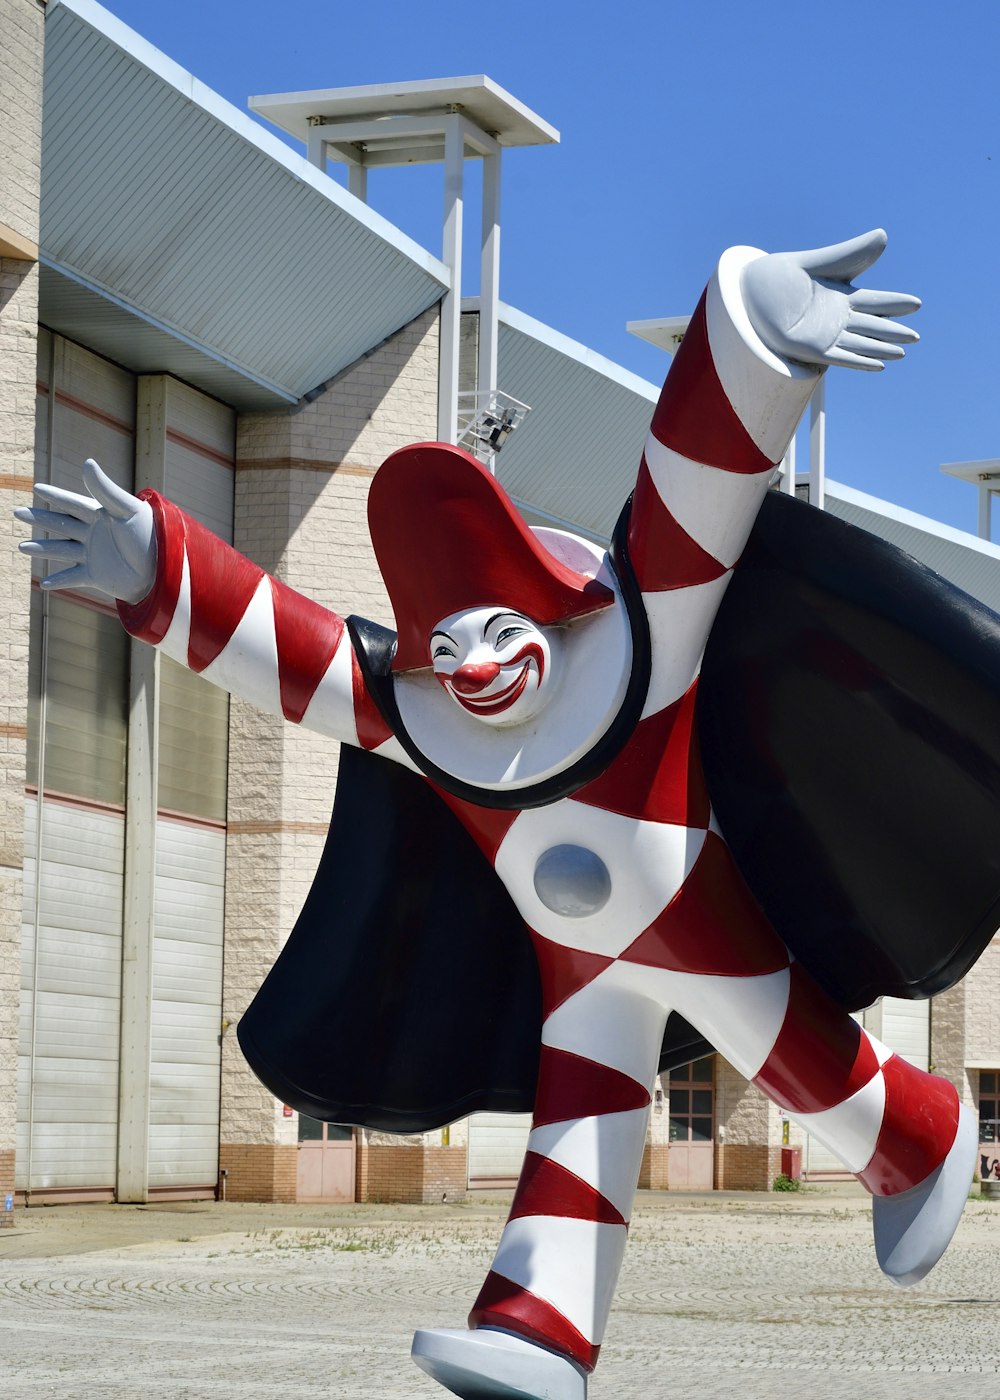 white, red, and black clown statue